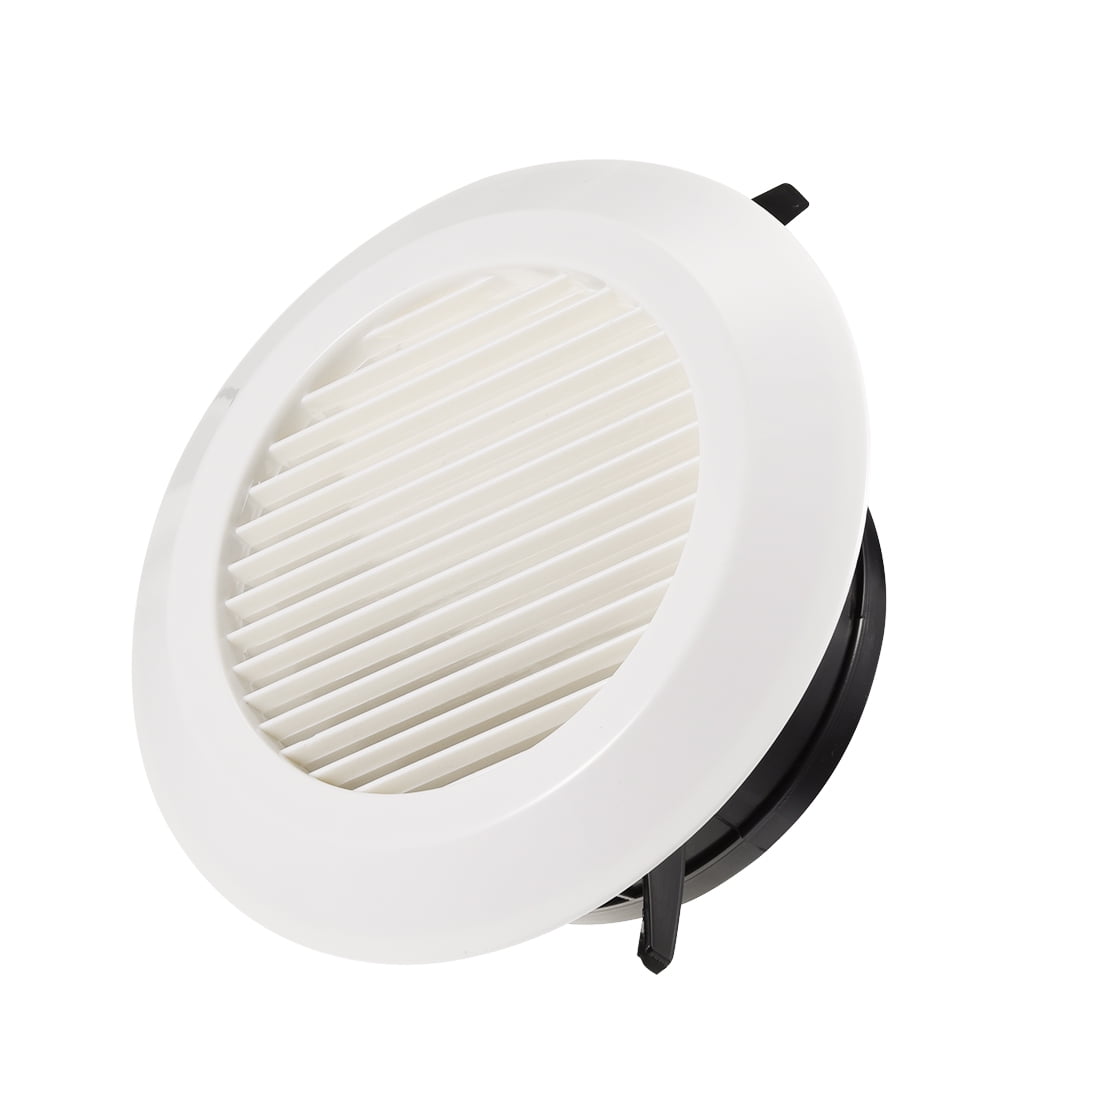 6 Inch Air Vent Circular ABS Louver White Grille Cover Exhaust Vent